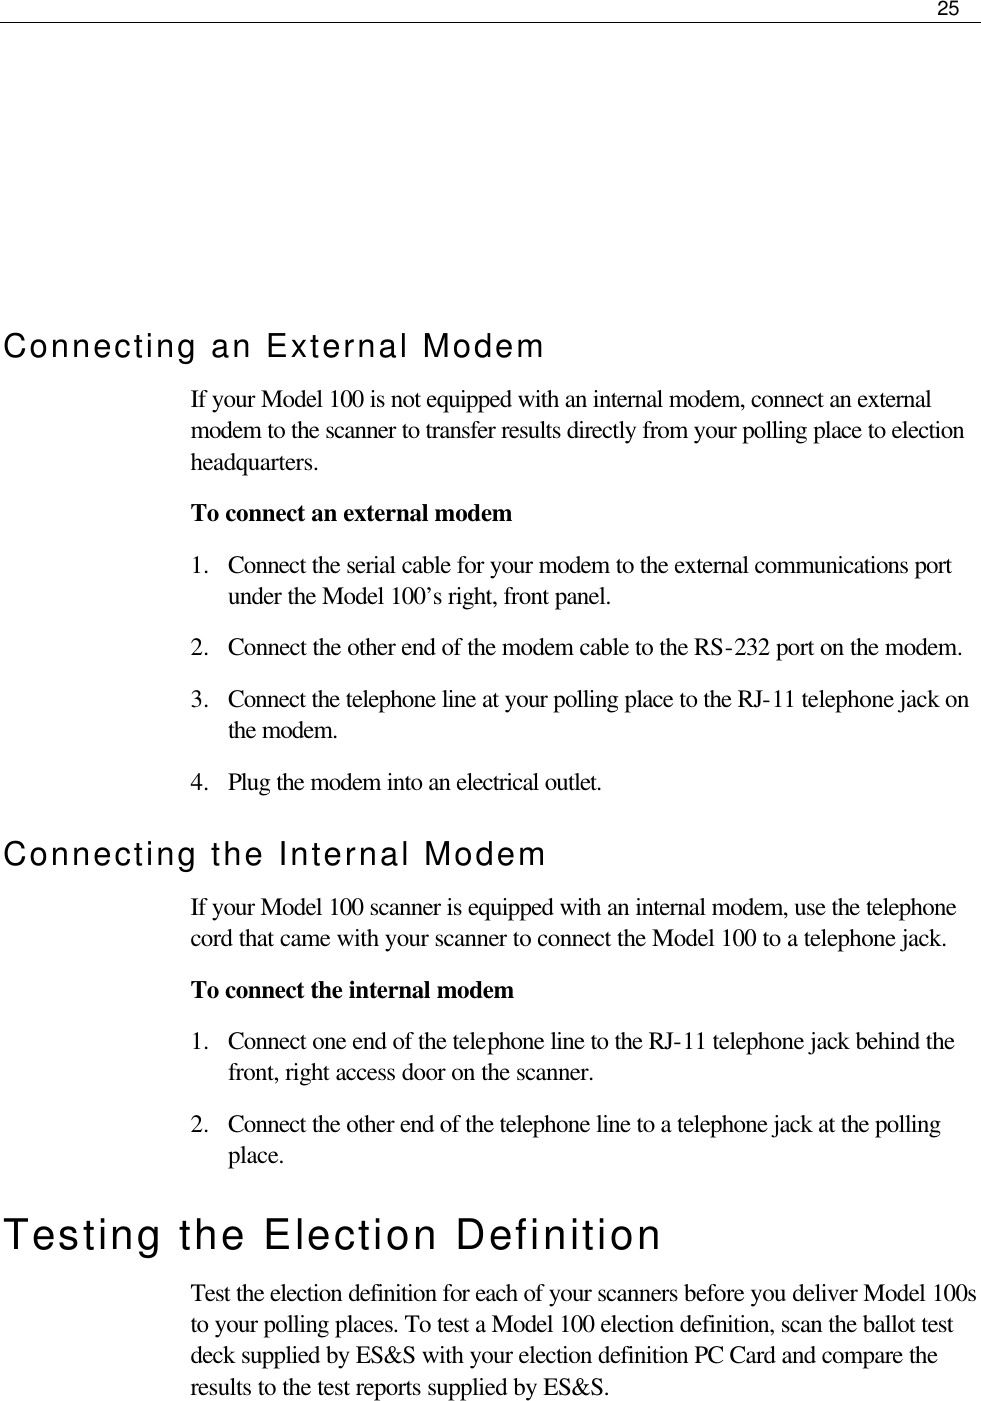     25       Connecting an External Modem If your Model 100 is not equipped with an internal modem, connect an external modem to the scanner to transfer results directly from your polling place to election headquarters. To connect an external modem 1.  Connect the serial cable for your modem to the external communications port under the Model 100’s right, front panel.  2.  Connect the other end of the modem cable to the RS-232 port on the modem. 3.  Connect the telephone line at your polling place to the RJ-11 telephone jack on the modem. 4.  Plug the modem into an electrical outlet. Connecting the Internal Modem If your Model 100 scanner is equipped with an internal modem, use the telephone cord that came with your scanner to connect the Model 100 to a telephone jack. To connect the internal modem 1.  Connect one end of the telephone line to the RJ-11 telephone jack behind the front, right access door on the scanner. 2.  Connect the other end of the telephone line to a telephone jack at the polling place. Testing the Election Definition Test the election definition for each of your scanners before you deliver Model 100s to your polling places. To test a Model 100 election definition, scan the ballot test deck supplied by ES&amp;S with your election definition PC Card and compare the results to the test reports supplied by ES&amp;S.  